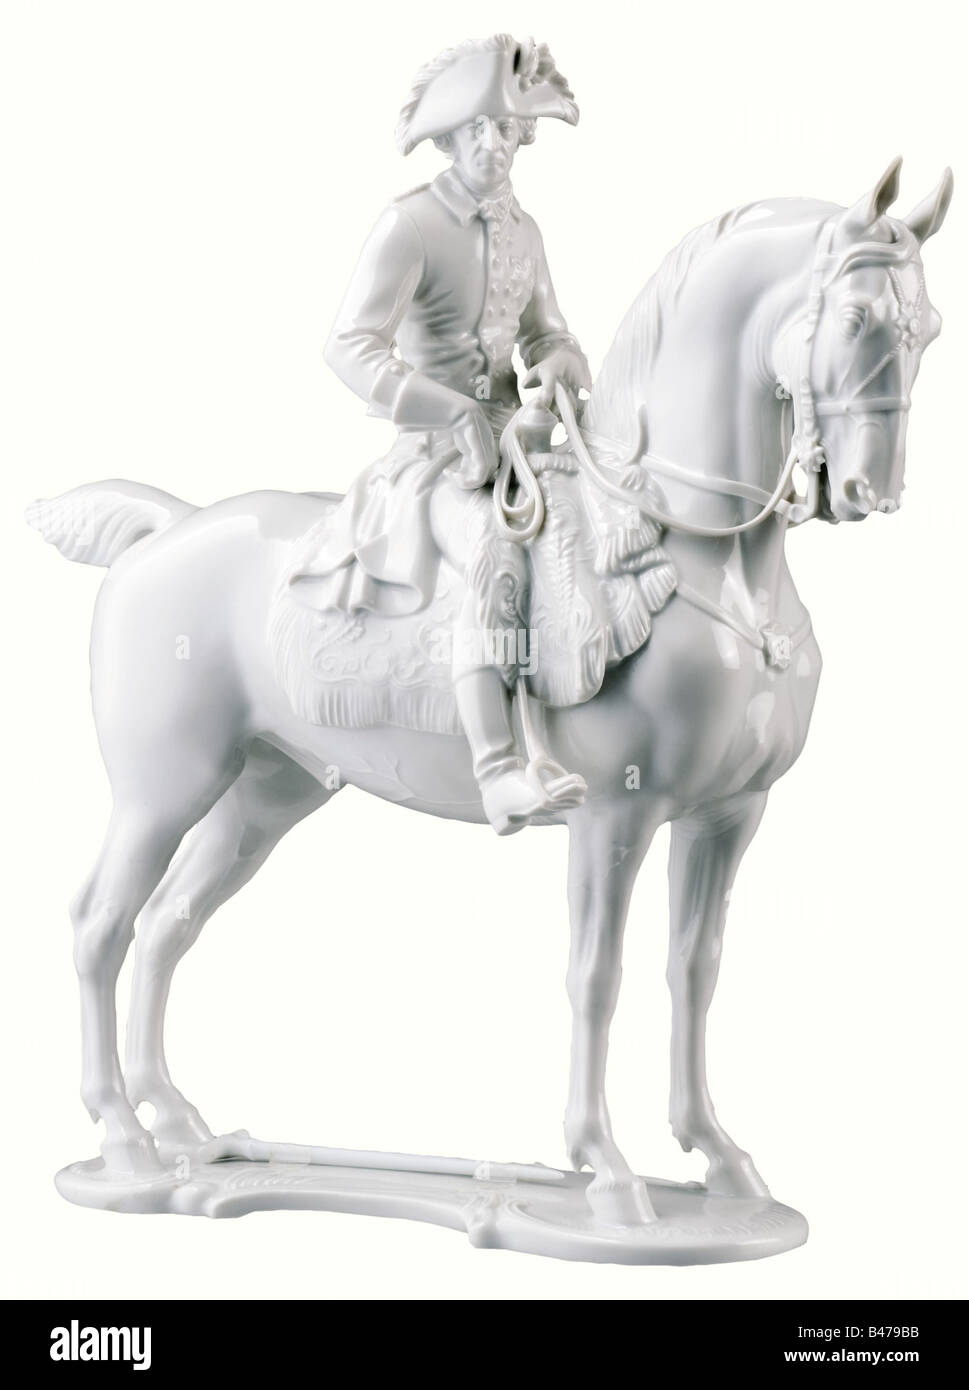 Frederick the Great., White glazed porcelain. The artist's signature 'Prof. Th. Kärner' stamped on the bottom, the manufacturer's mark and model number '94' have been effaced. Presumably small replacments (blade of the small sword) and restorations. Possibly an Eschenbach production? Height 29 cm. people, 1930s, 1930s, 20th century, object, objects, stills, clipping, clippings, cut out, cut-out, cut-outs, man, men, male, Stock Photo